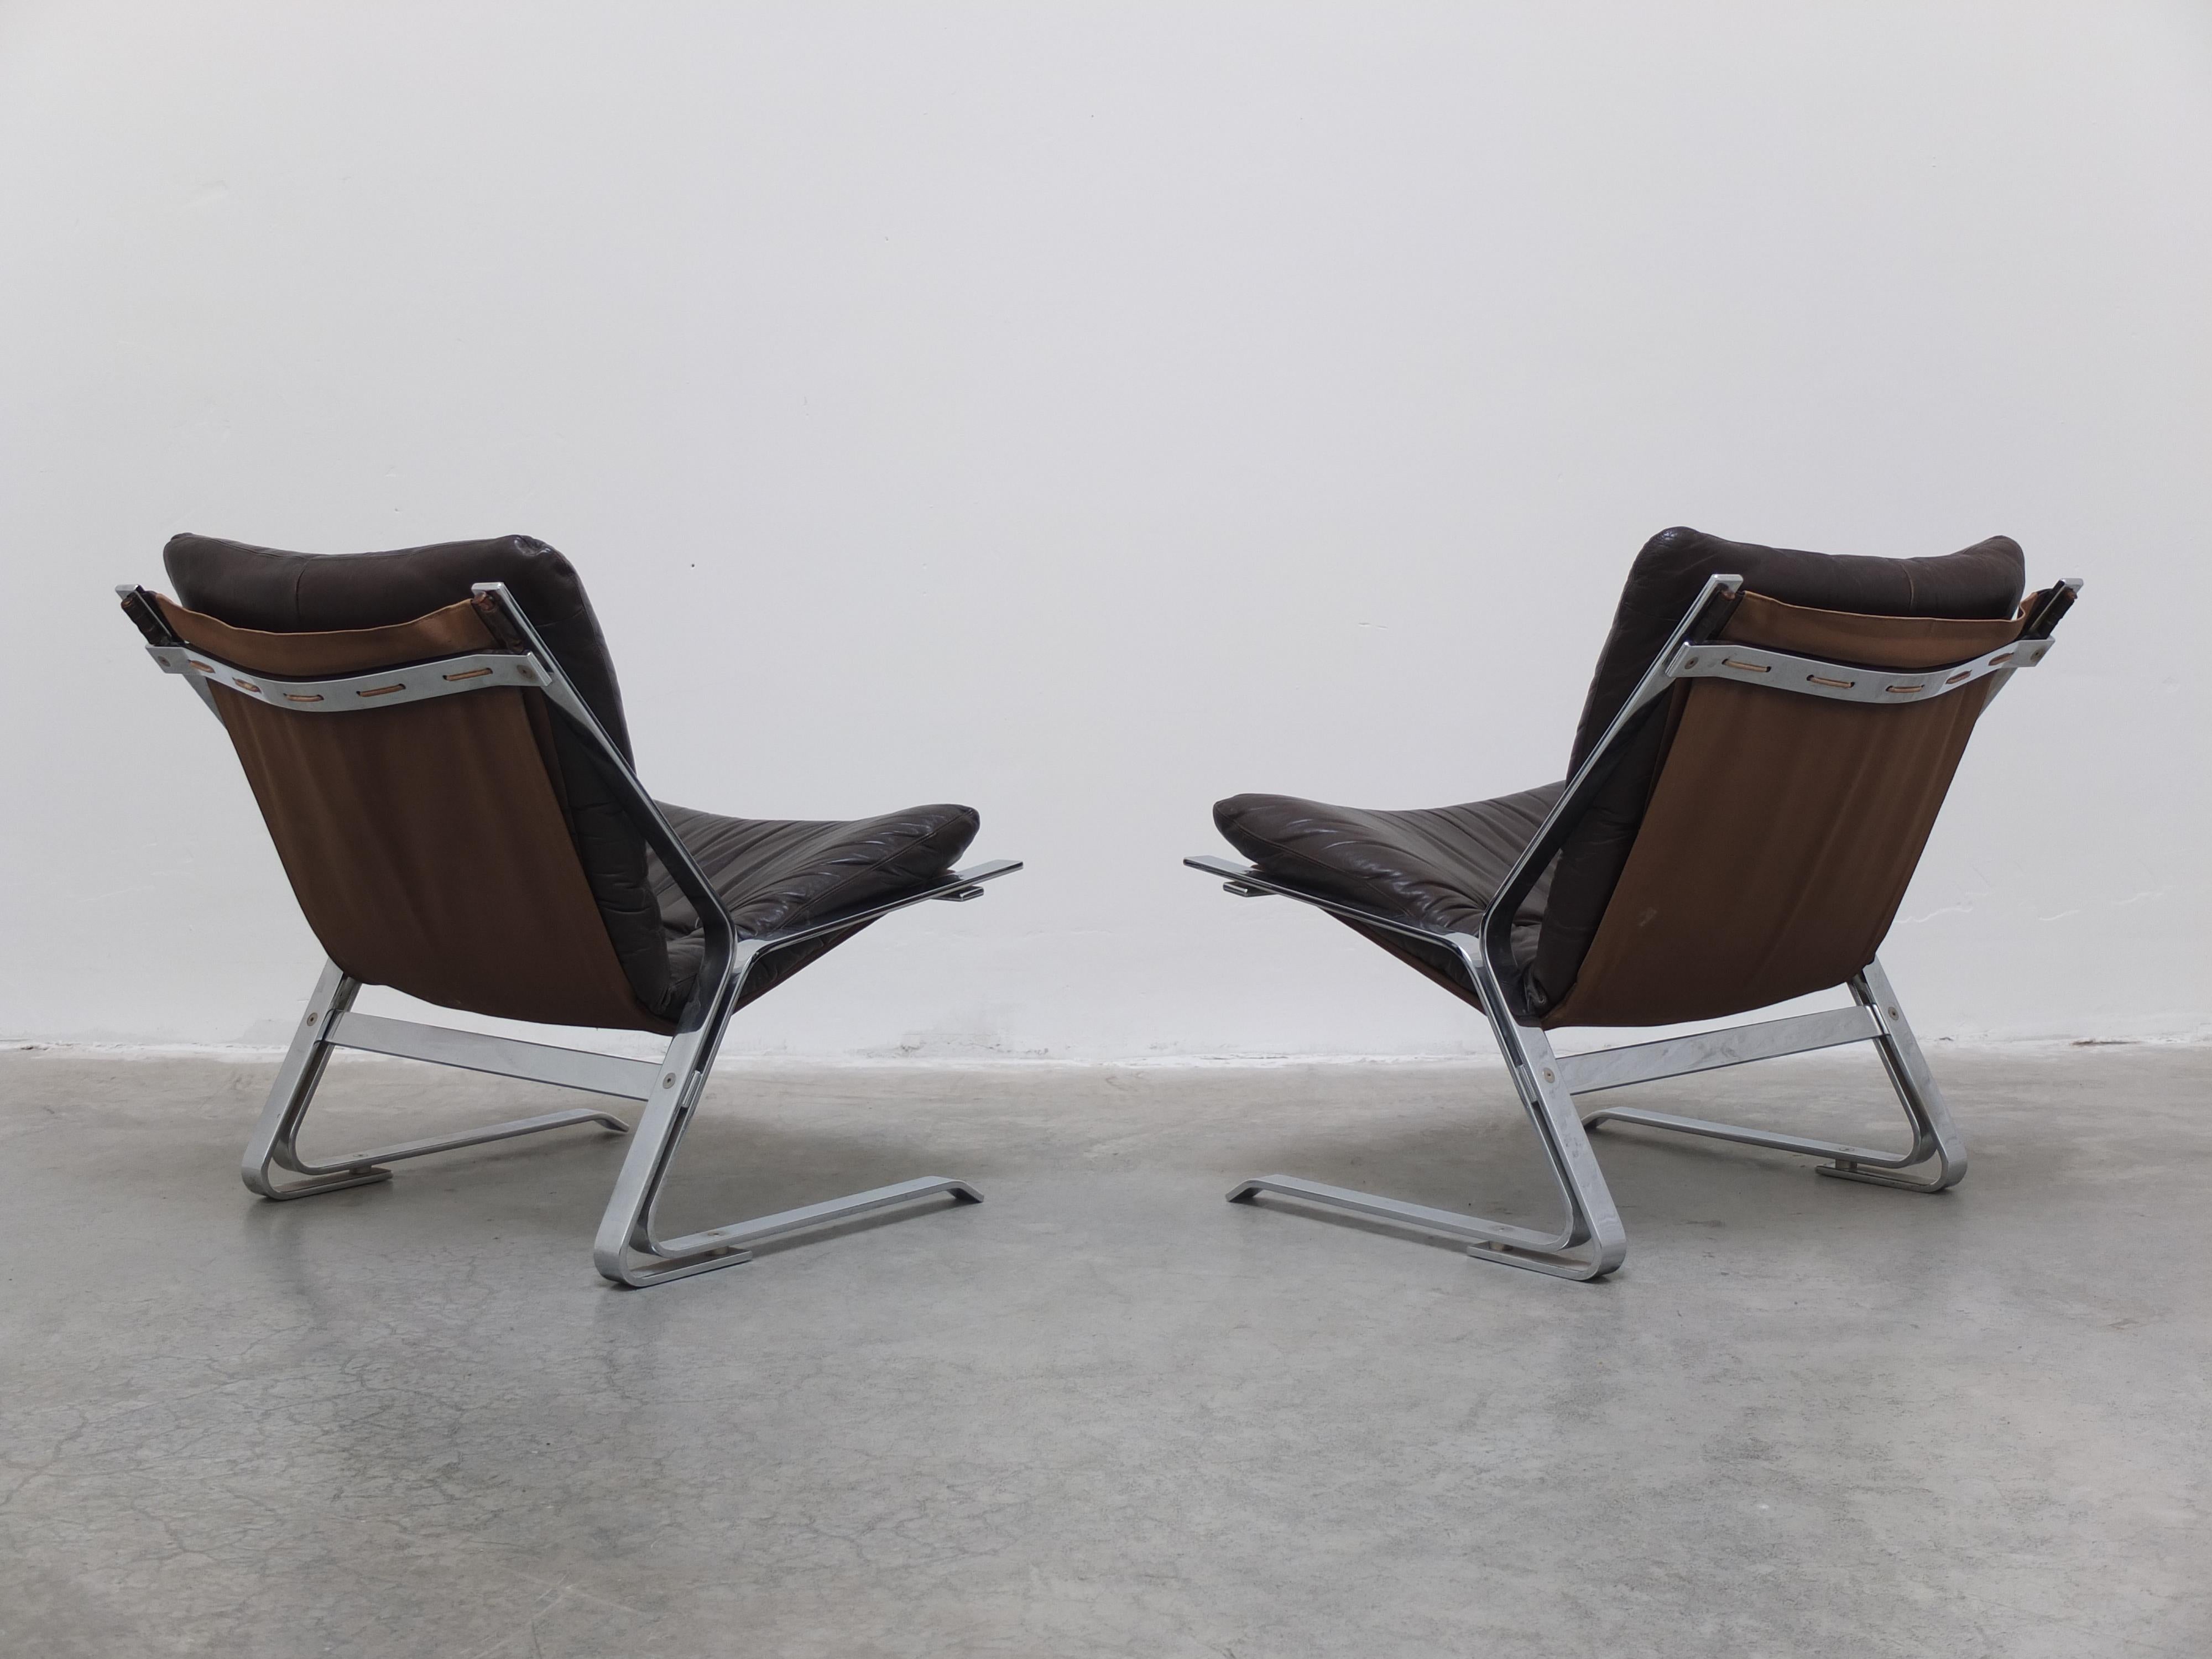 Rare Pair of 'Pirate' Lounge Chairs by Elsa & Nordahl Solheim for Rykken, 1960s For Sale 11